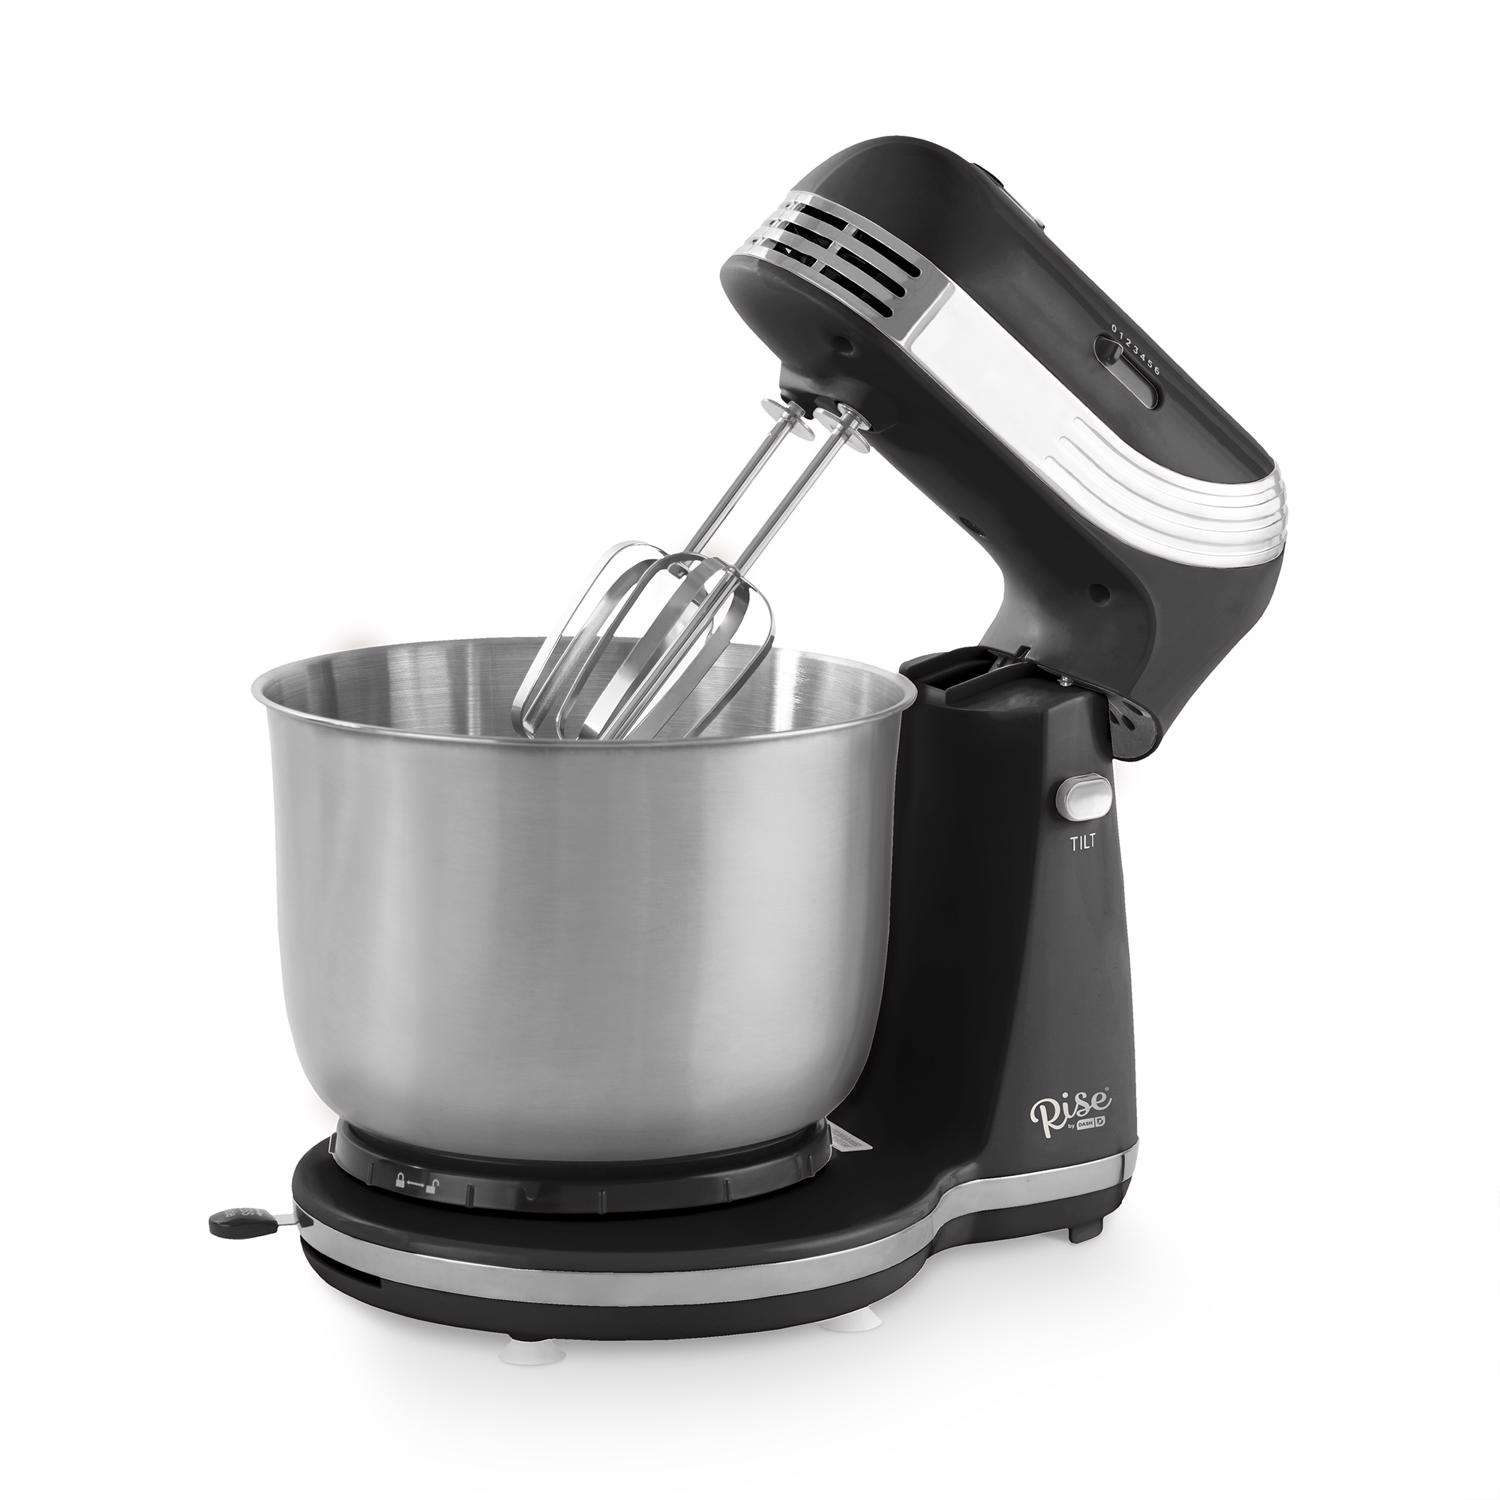 Rise by Dash Stand Mixer, 6 Speed, with Mixing Bowl, Dough Hooks, Beaters,  Recipes , Red, 3 Qt